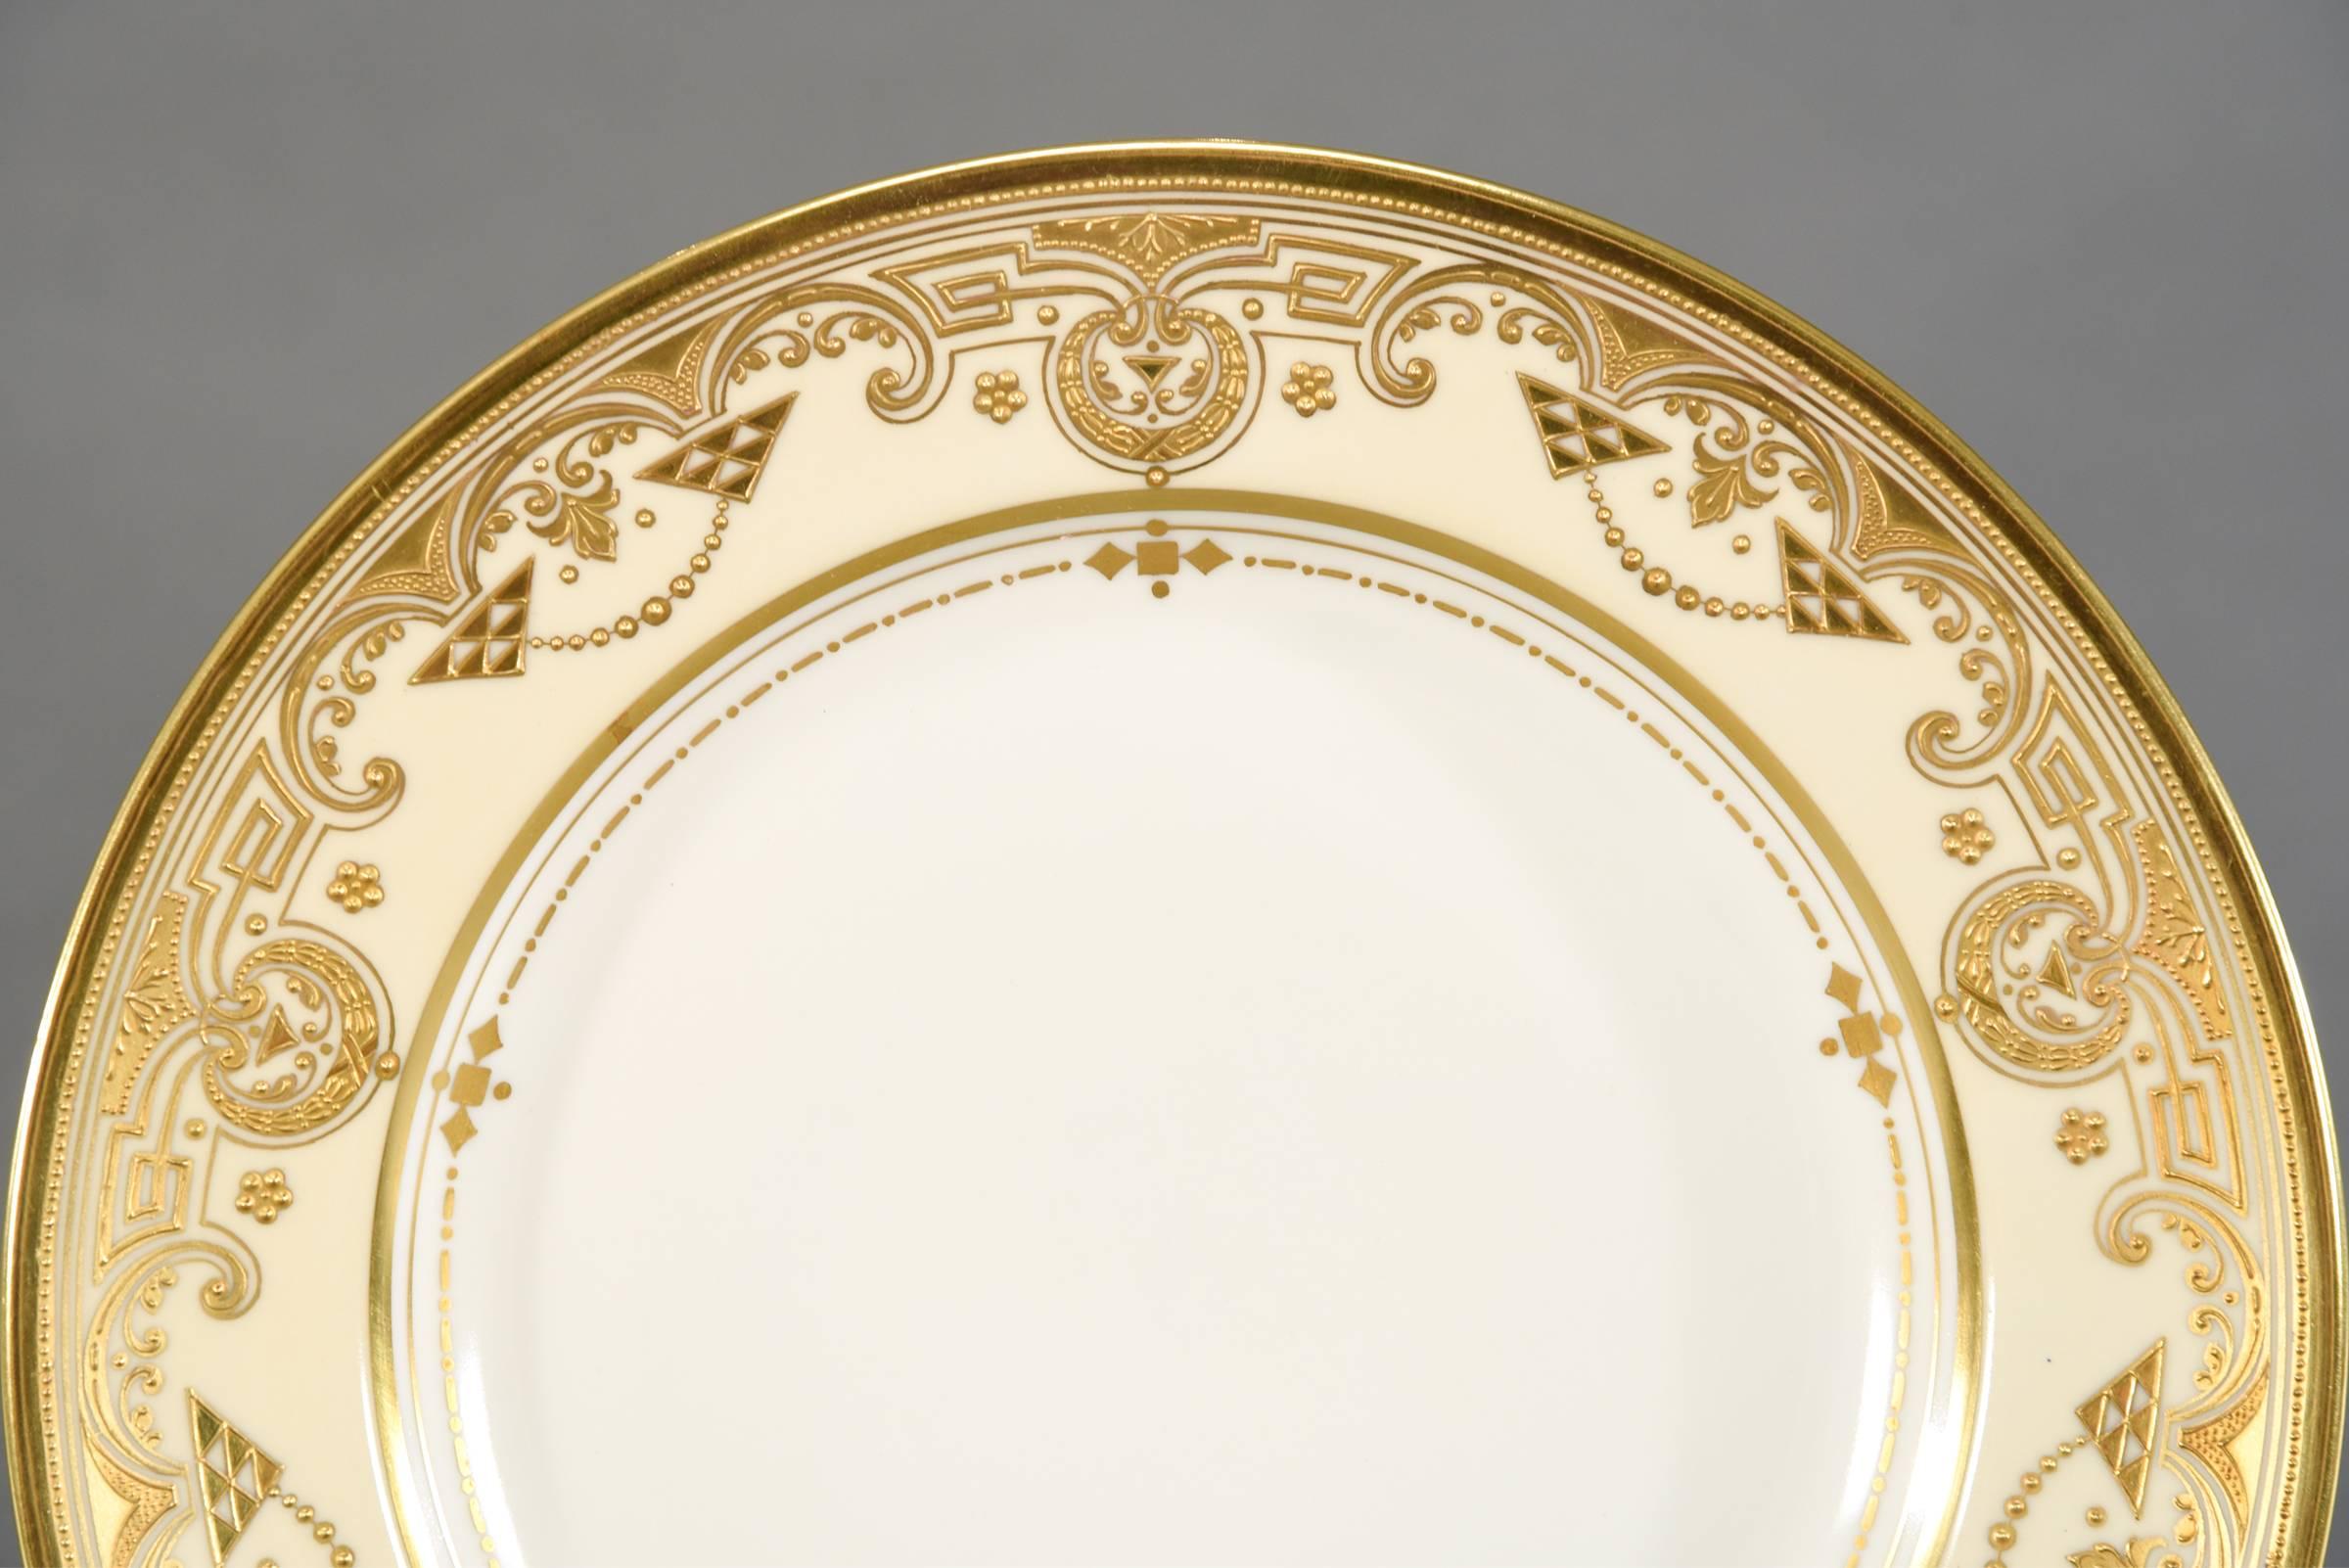 This set of 12 dinner plates are made by the iconic Ambrosius Lamm Dresden in a rare Arts & Crafts style decoration featuring a clear white center, framed with an ivory border. It is further embellished with an unusual raised paste gold motif and